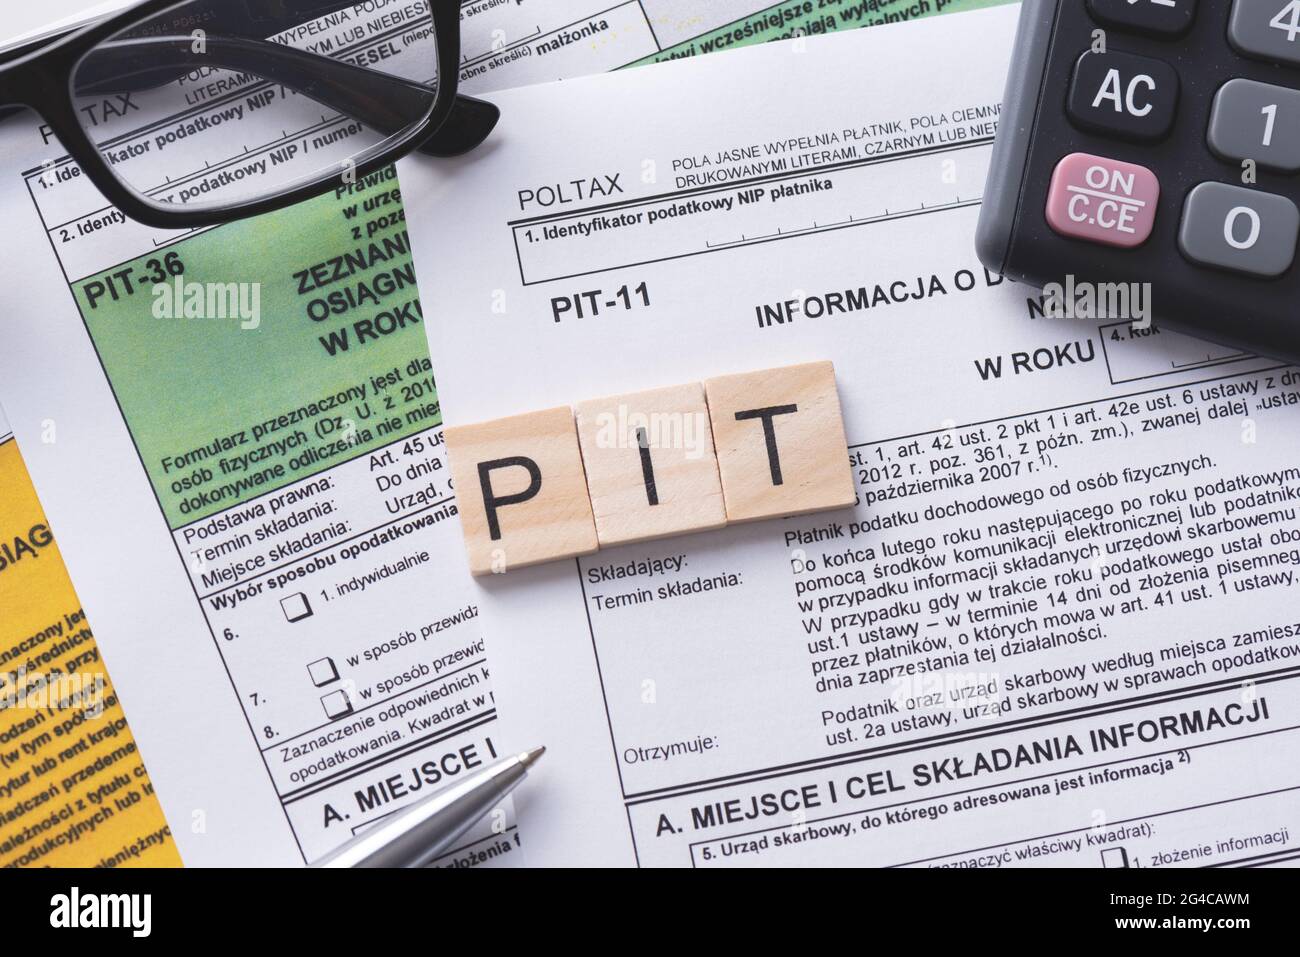 Tax income concept with polish tax forms and PIT word from tiles, means personal tax income in Poland Stock Photo